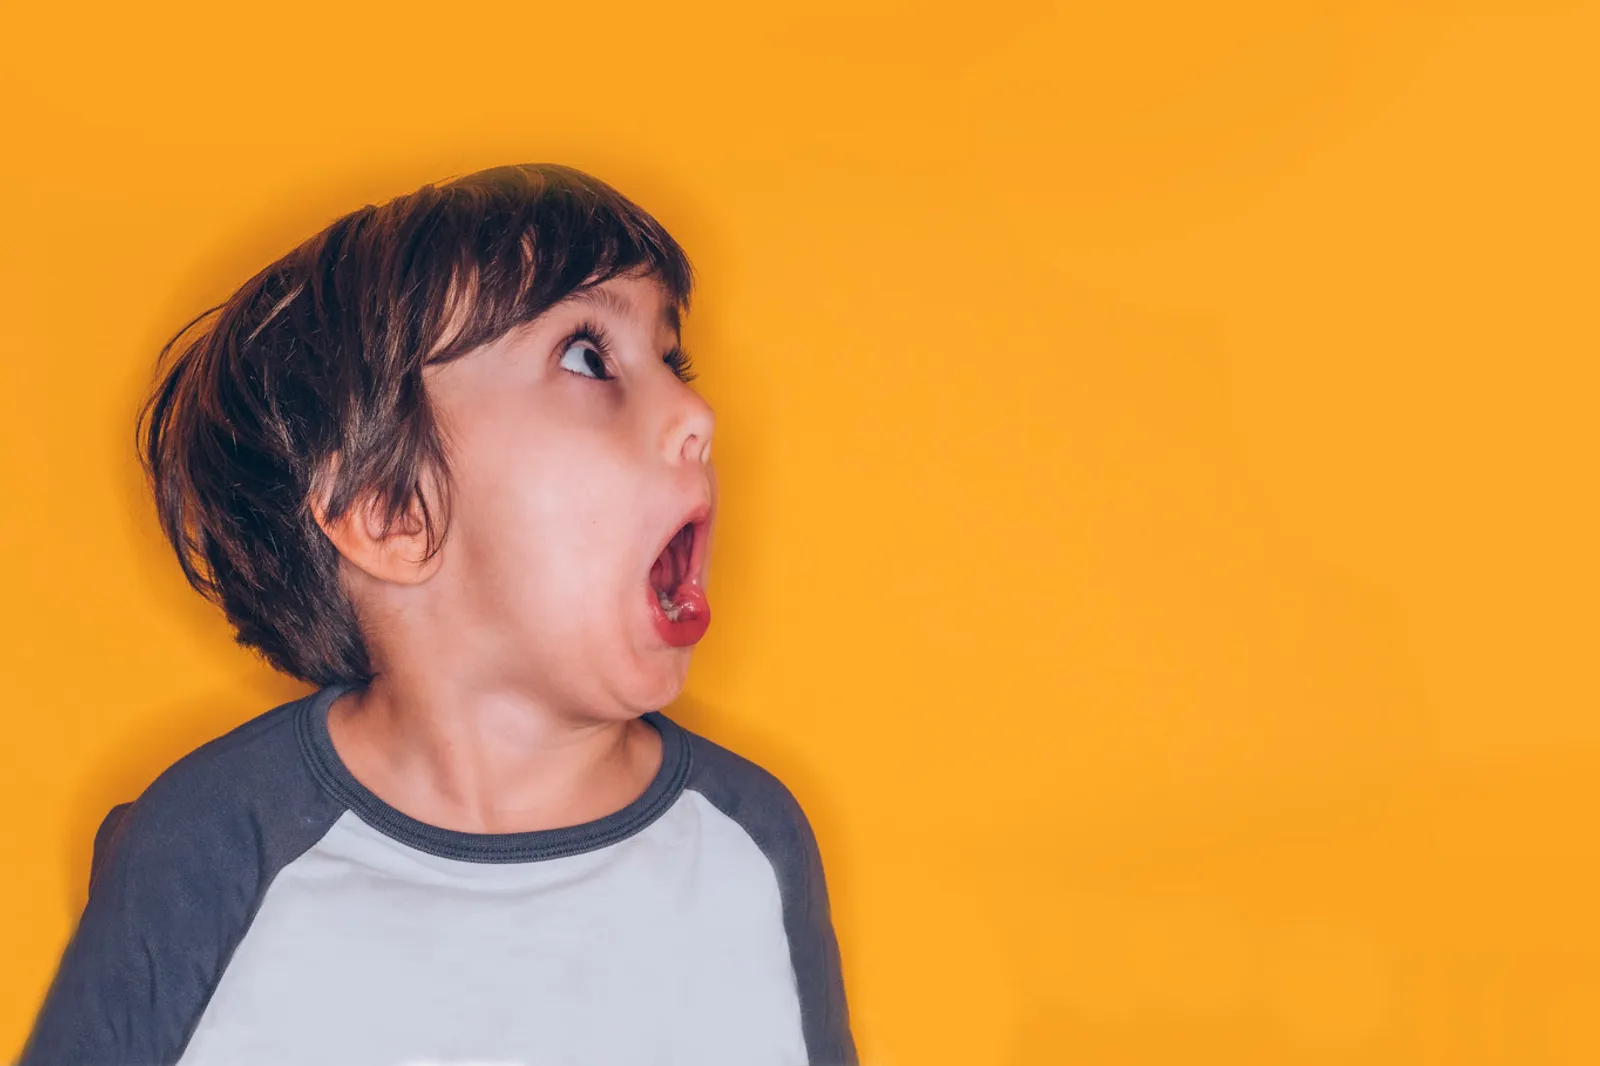 boy shouting on a yellow background